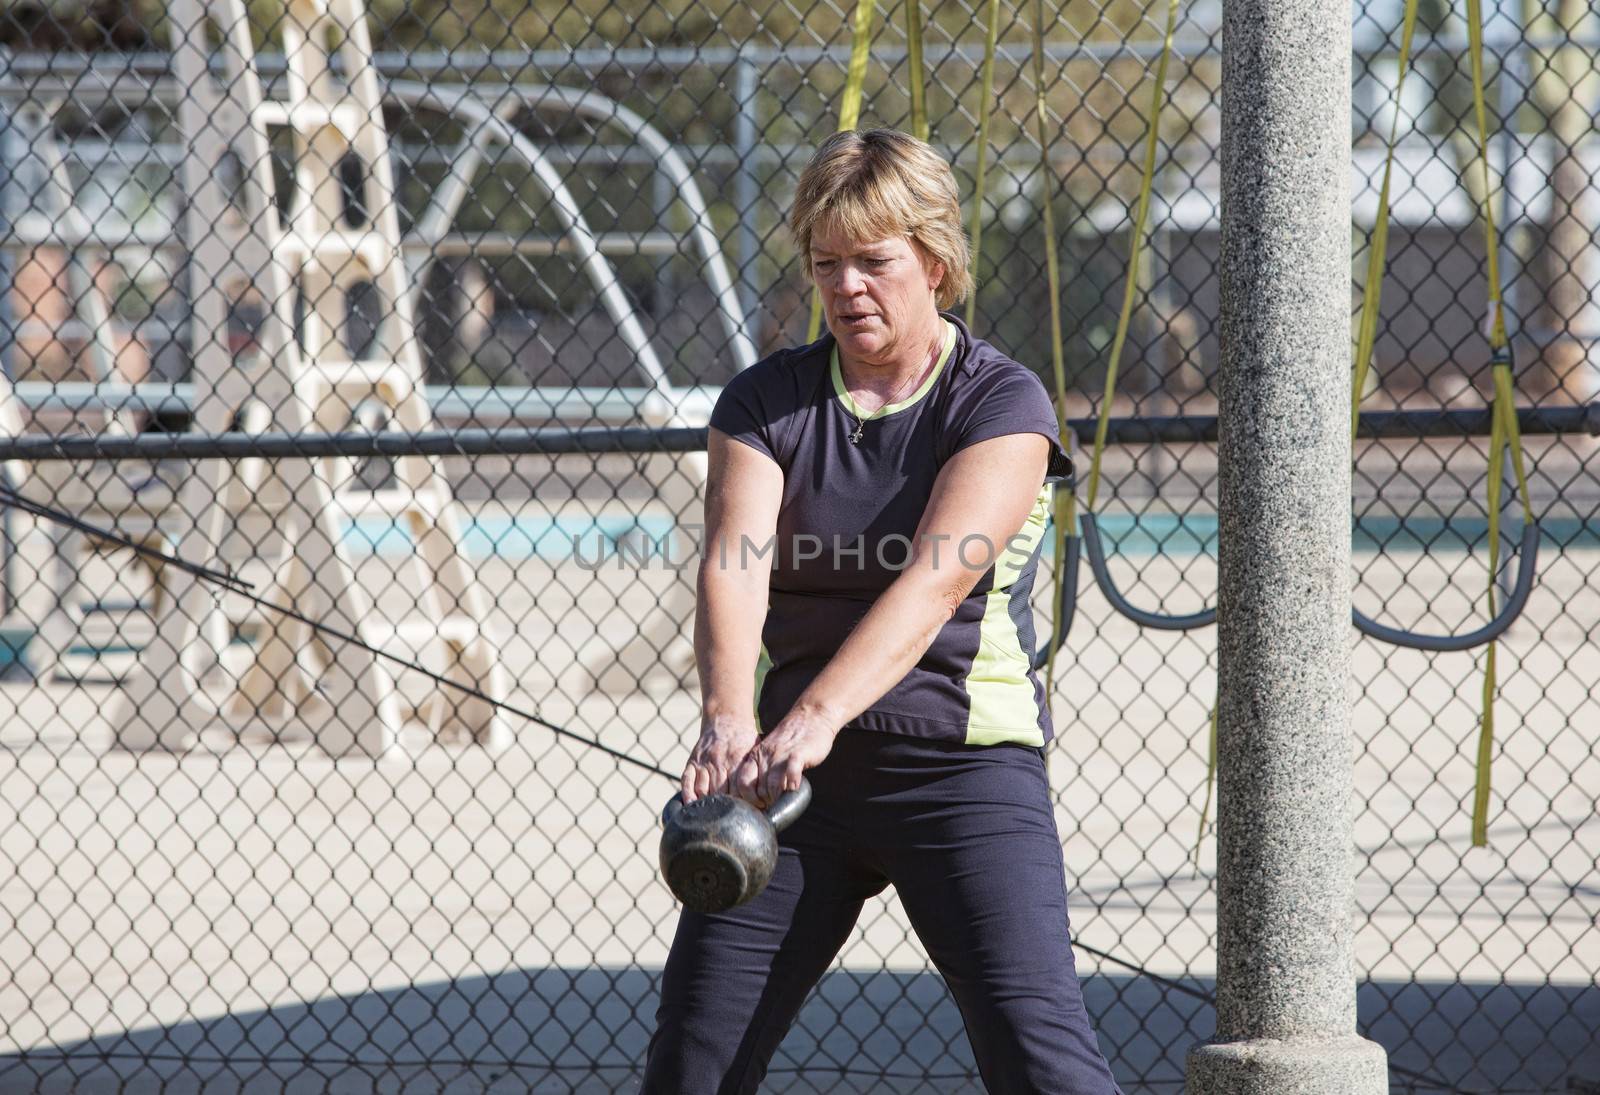 Middle aged woman lifting kettle bell weights outdoors